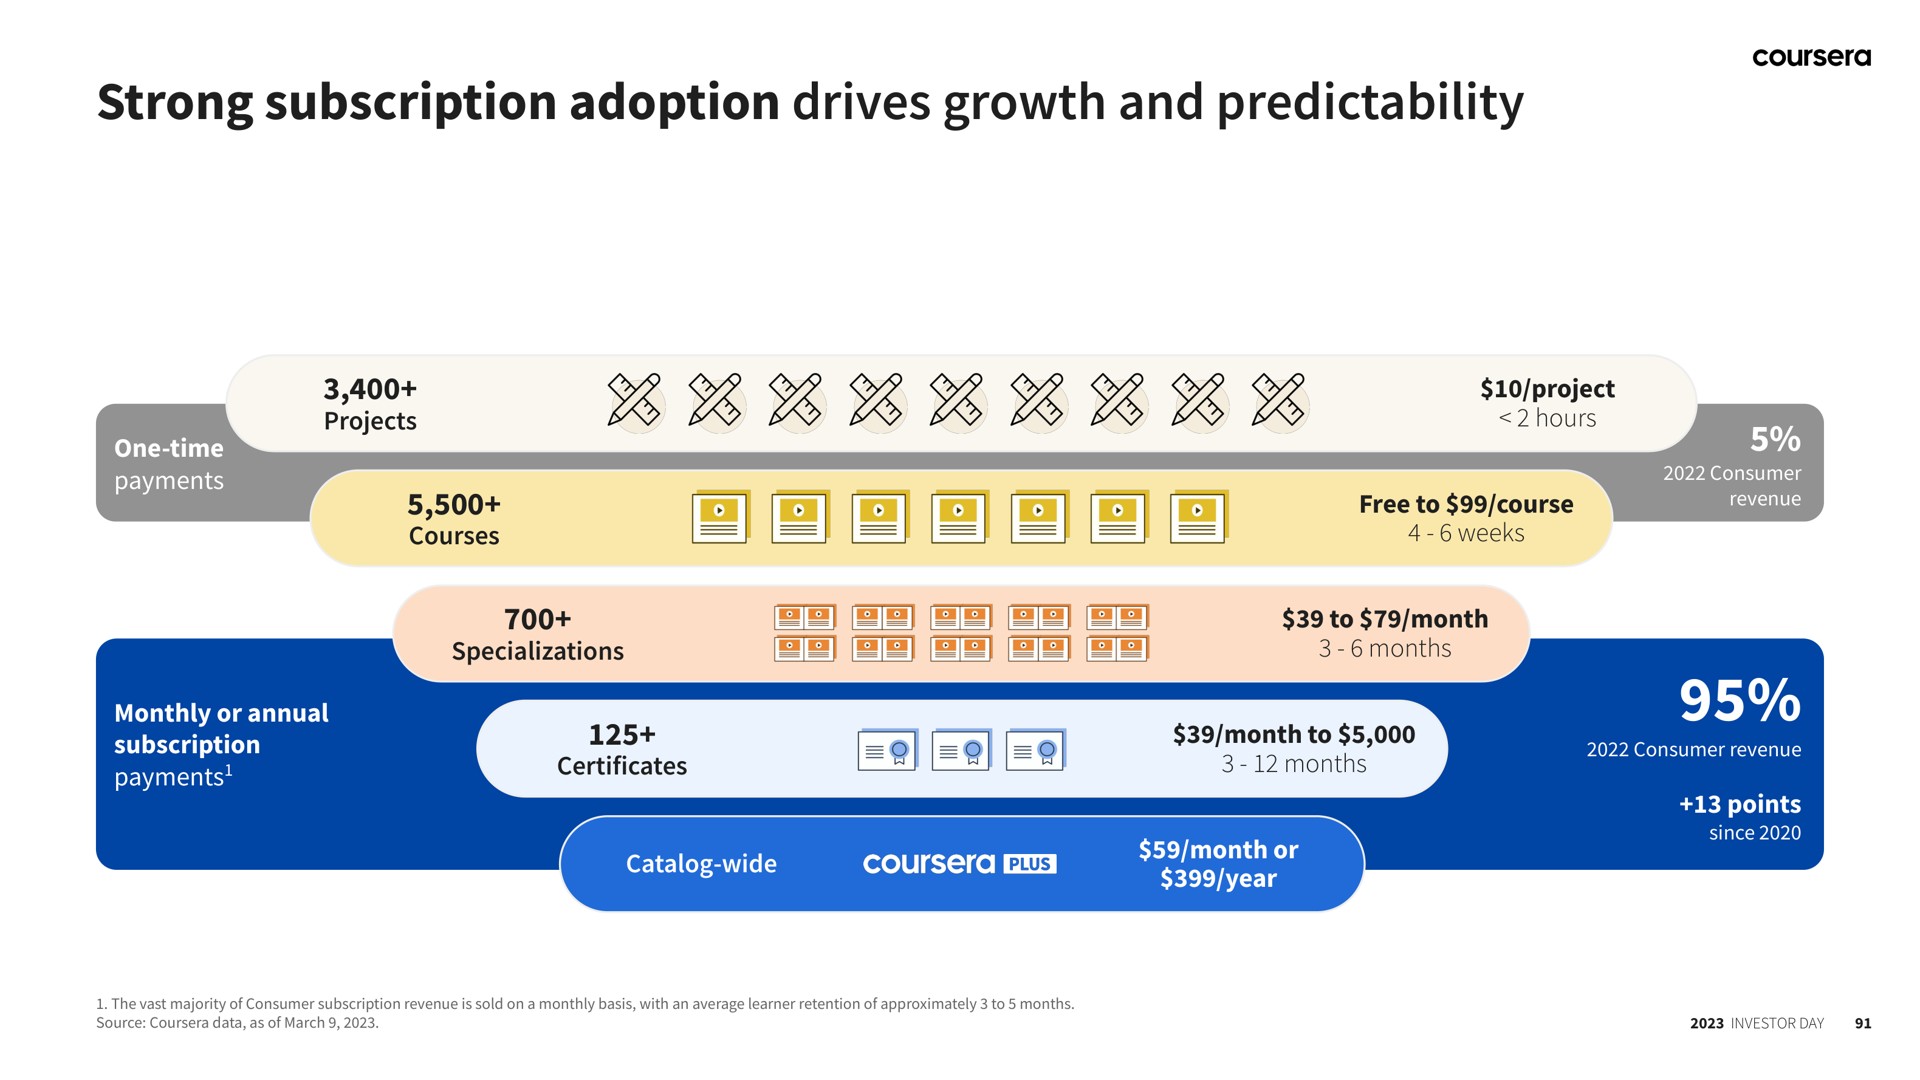 strong subscription adoption drives growth and predictability | Coursera